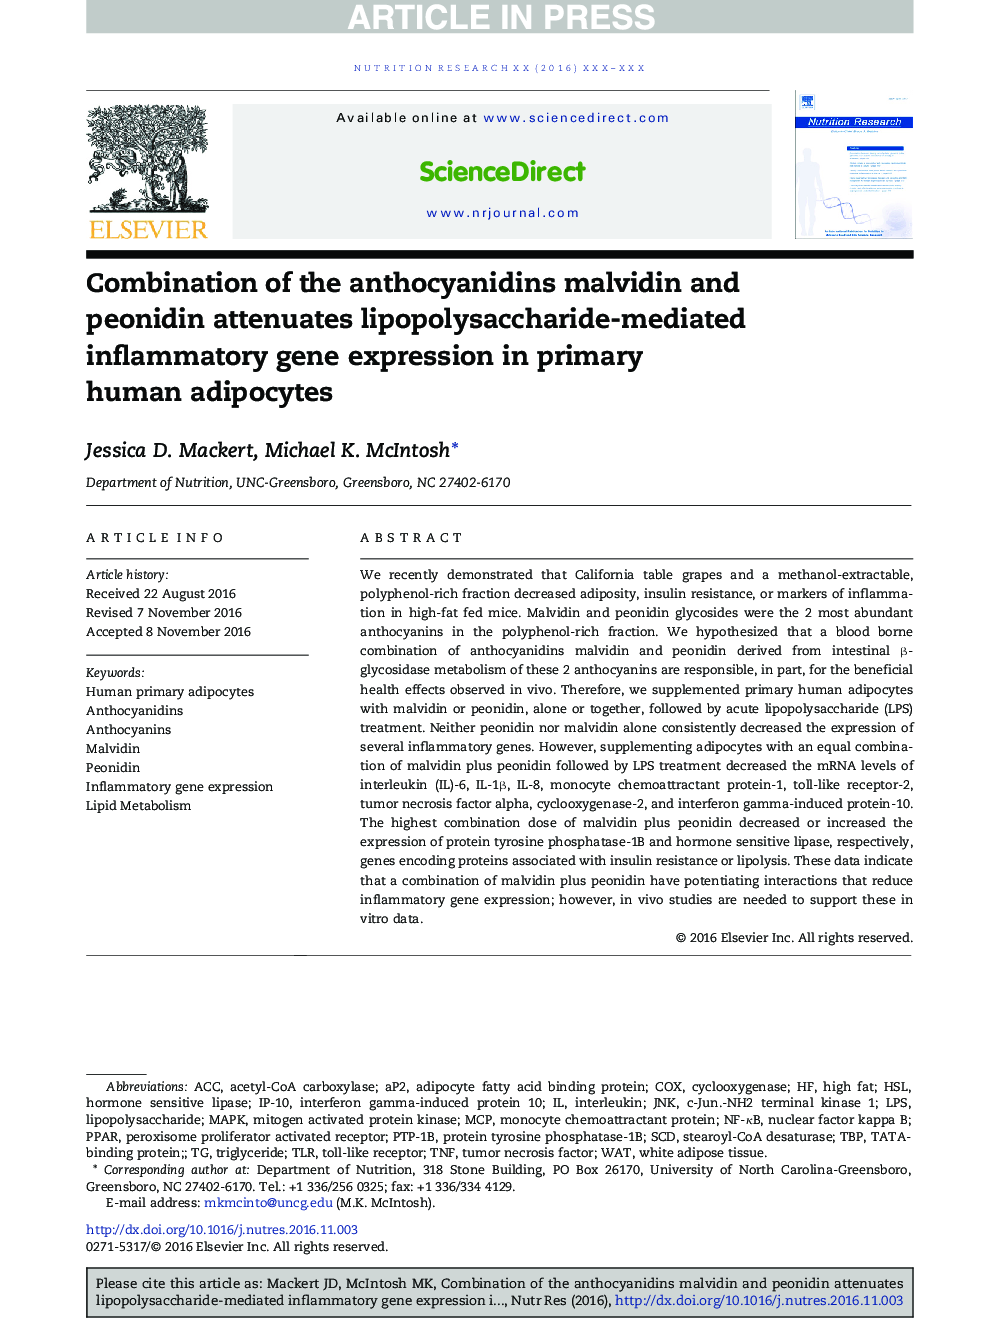 Combination of the anthocyanidins malvidin and peonidin attenuates lipopolysaccharide-mediated inflammatory gene expression in primary human adipocytes